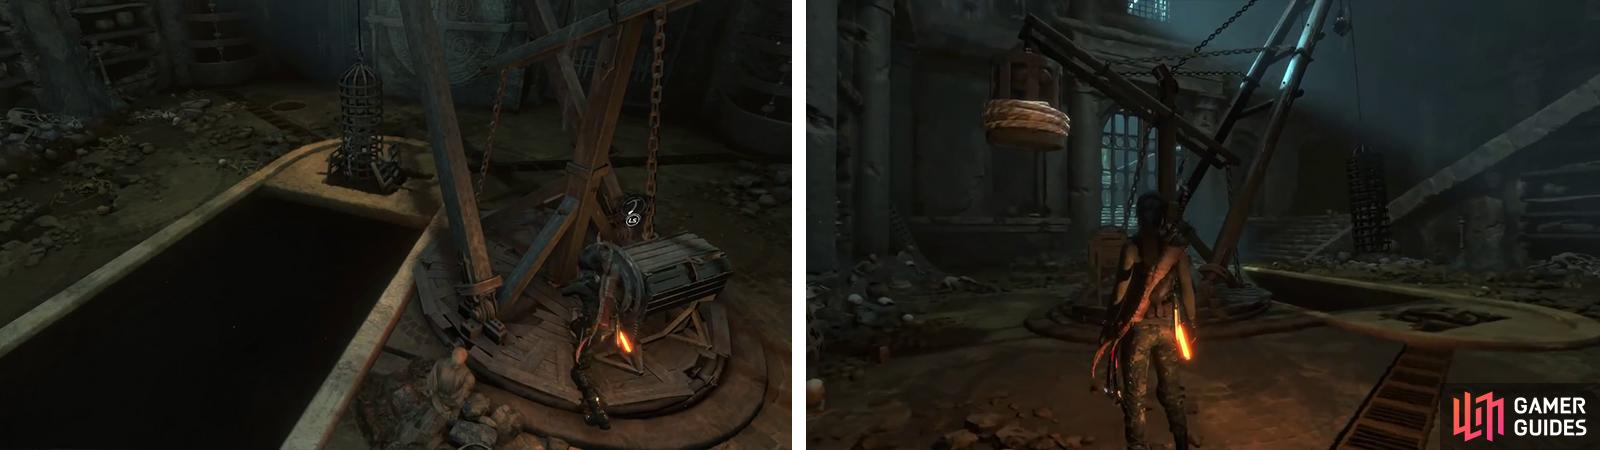 Use the wheel to raise the cage out of the floor (left). Use Rope Arrows to rotate the crane so that the cage is above the pool in the centre of the room (right).